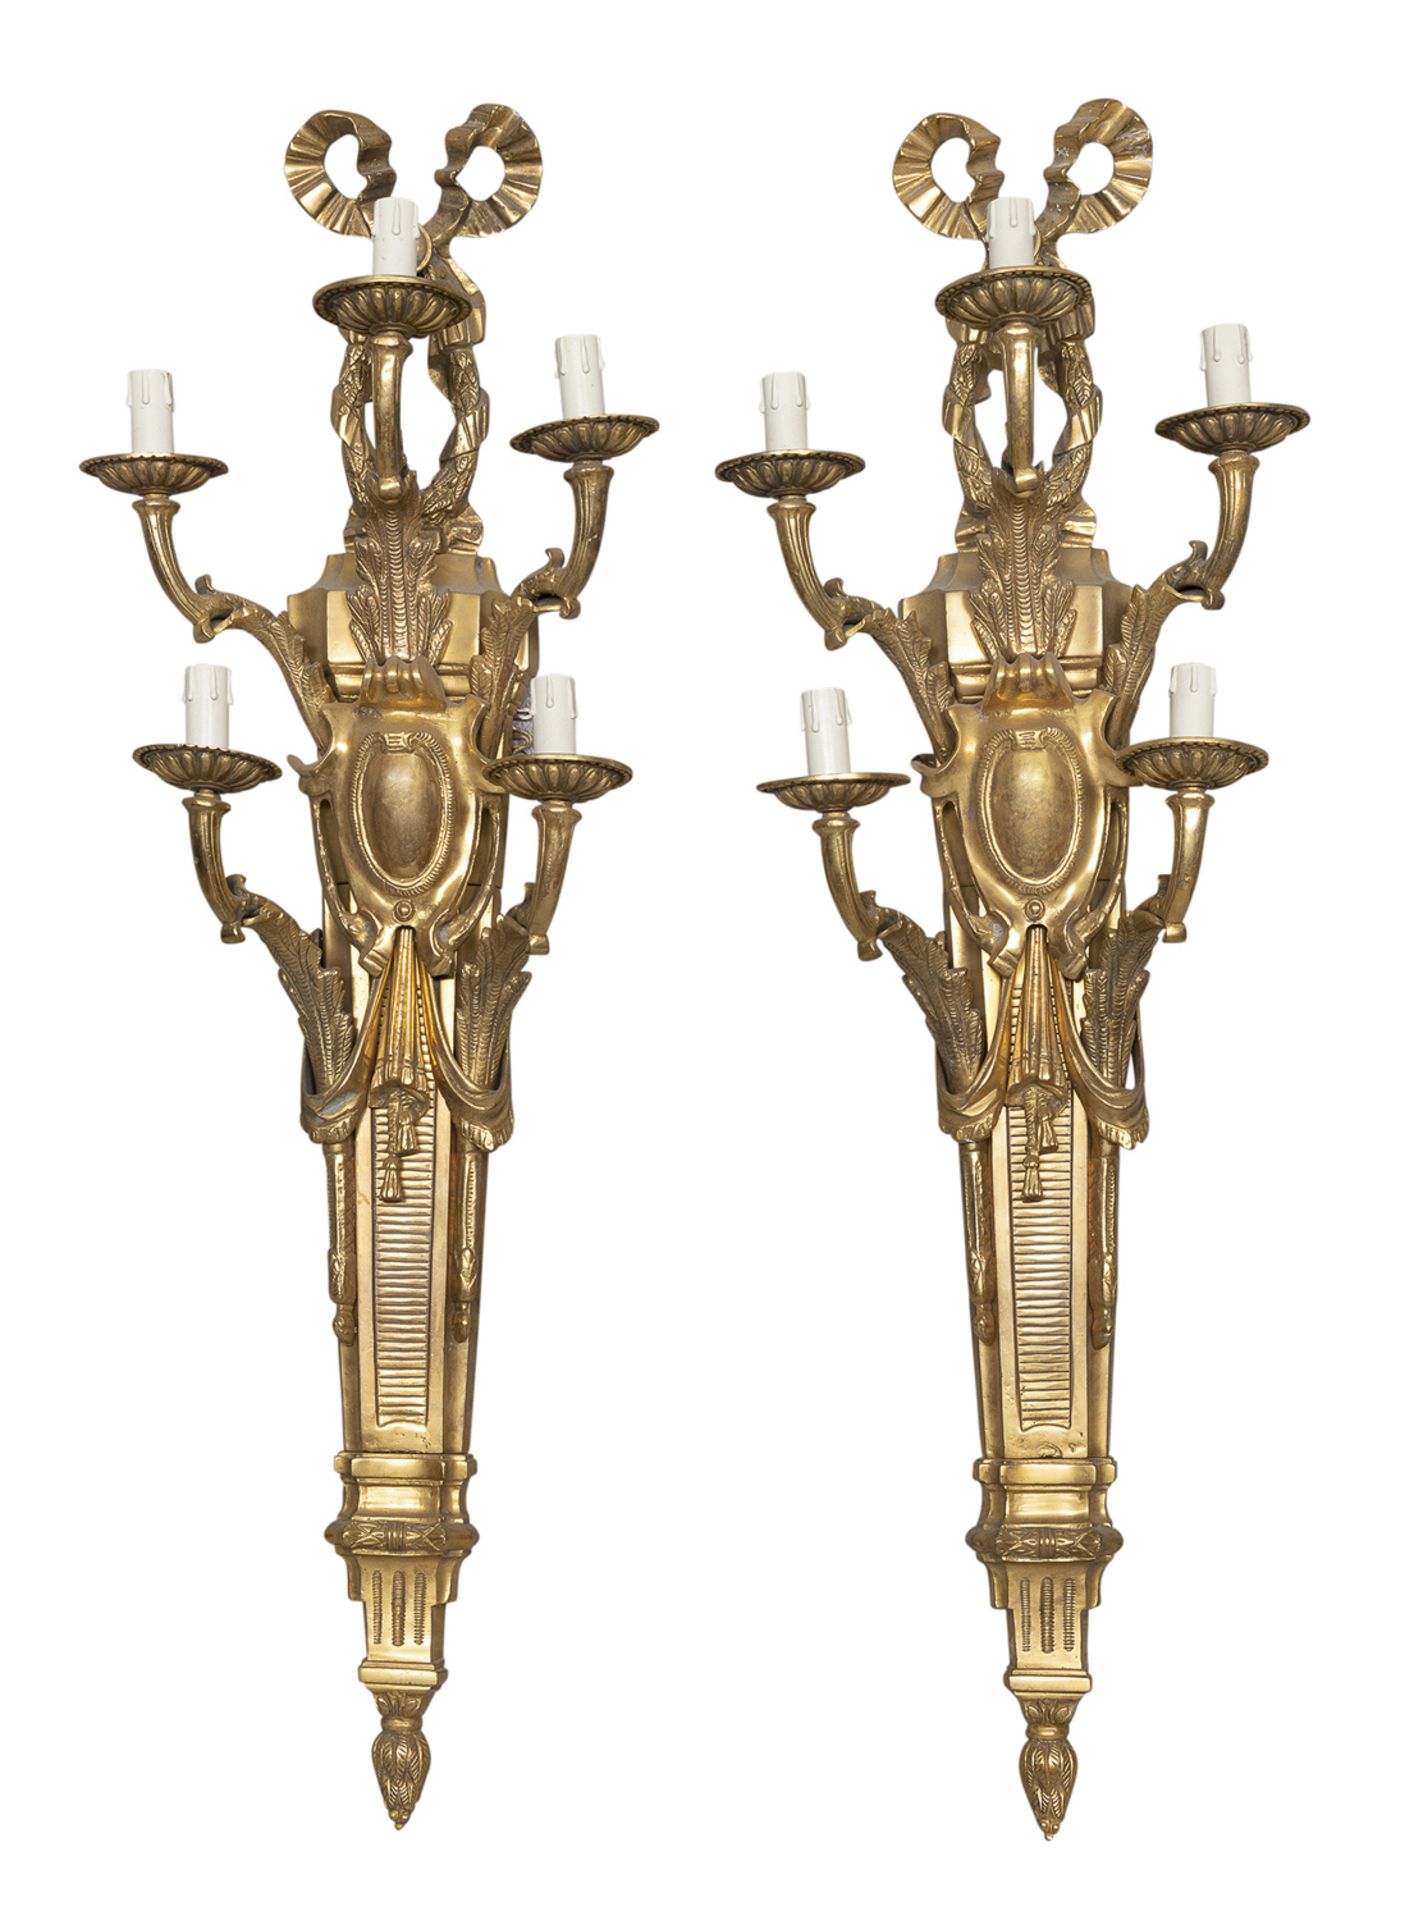 BEAUTIFUL PAIR OF BIG GILDED BRONZE APPLIQUES EARLY 20TH CENTURY